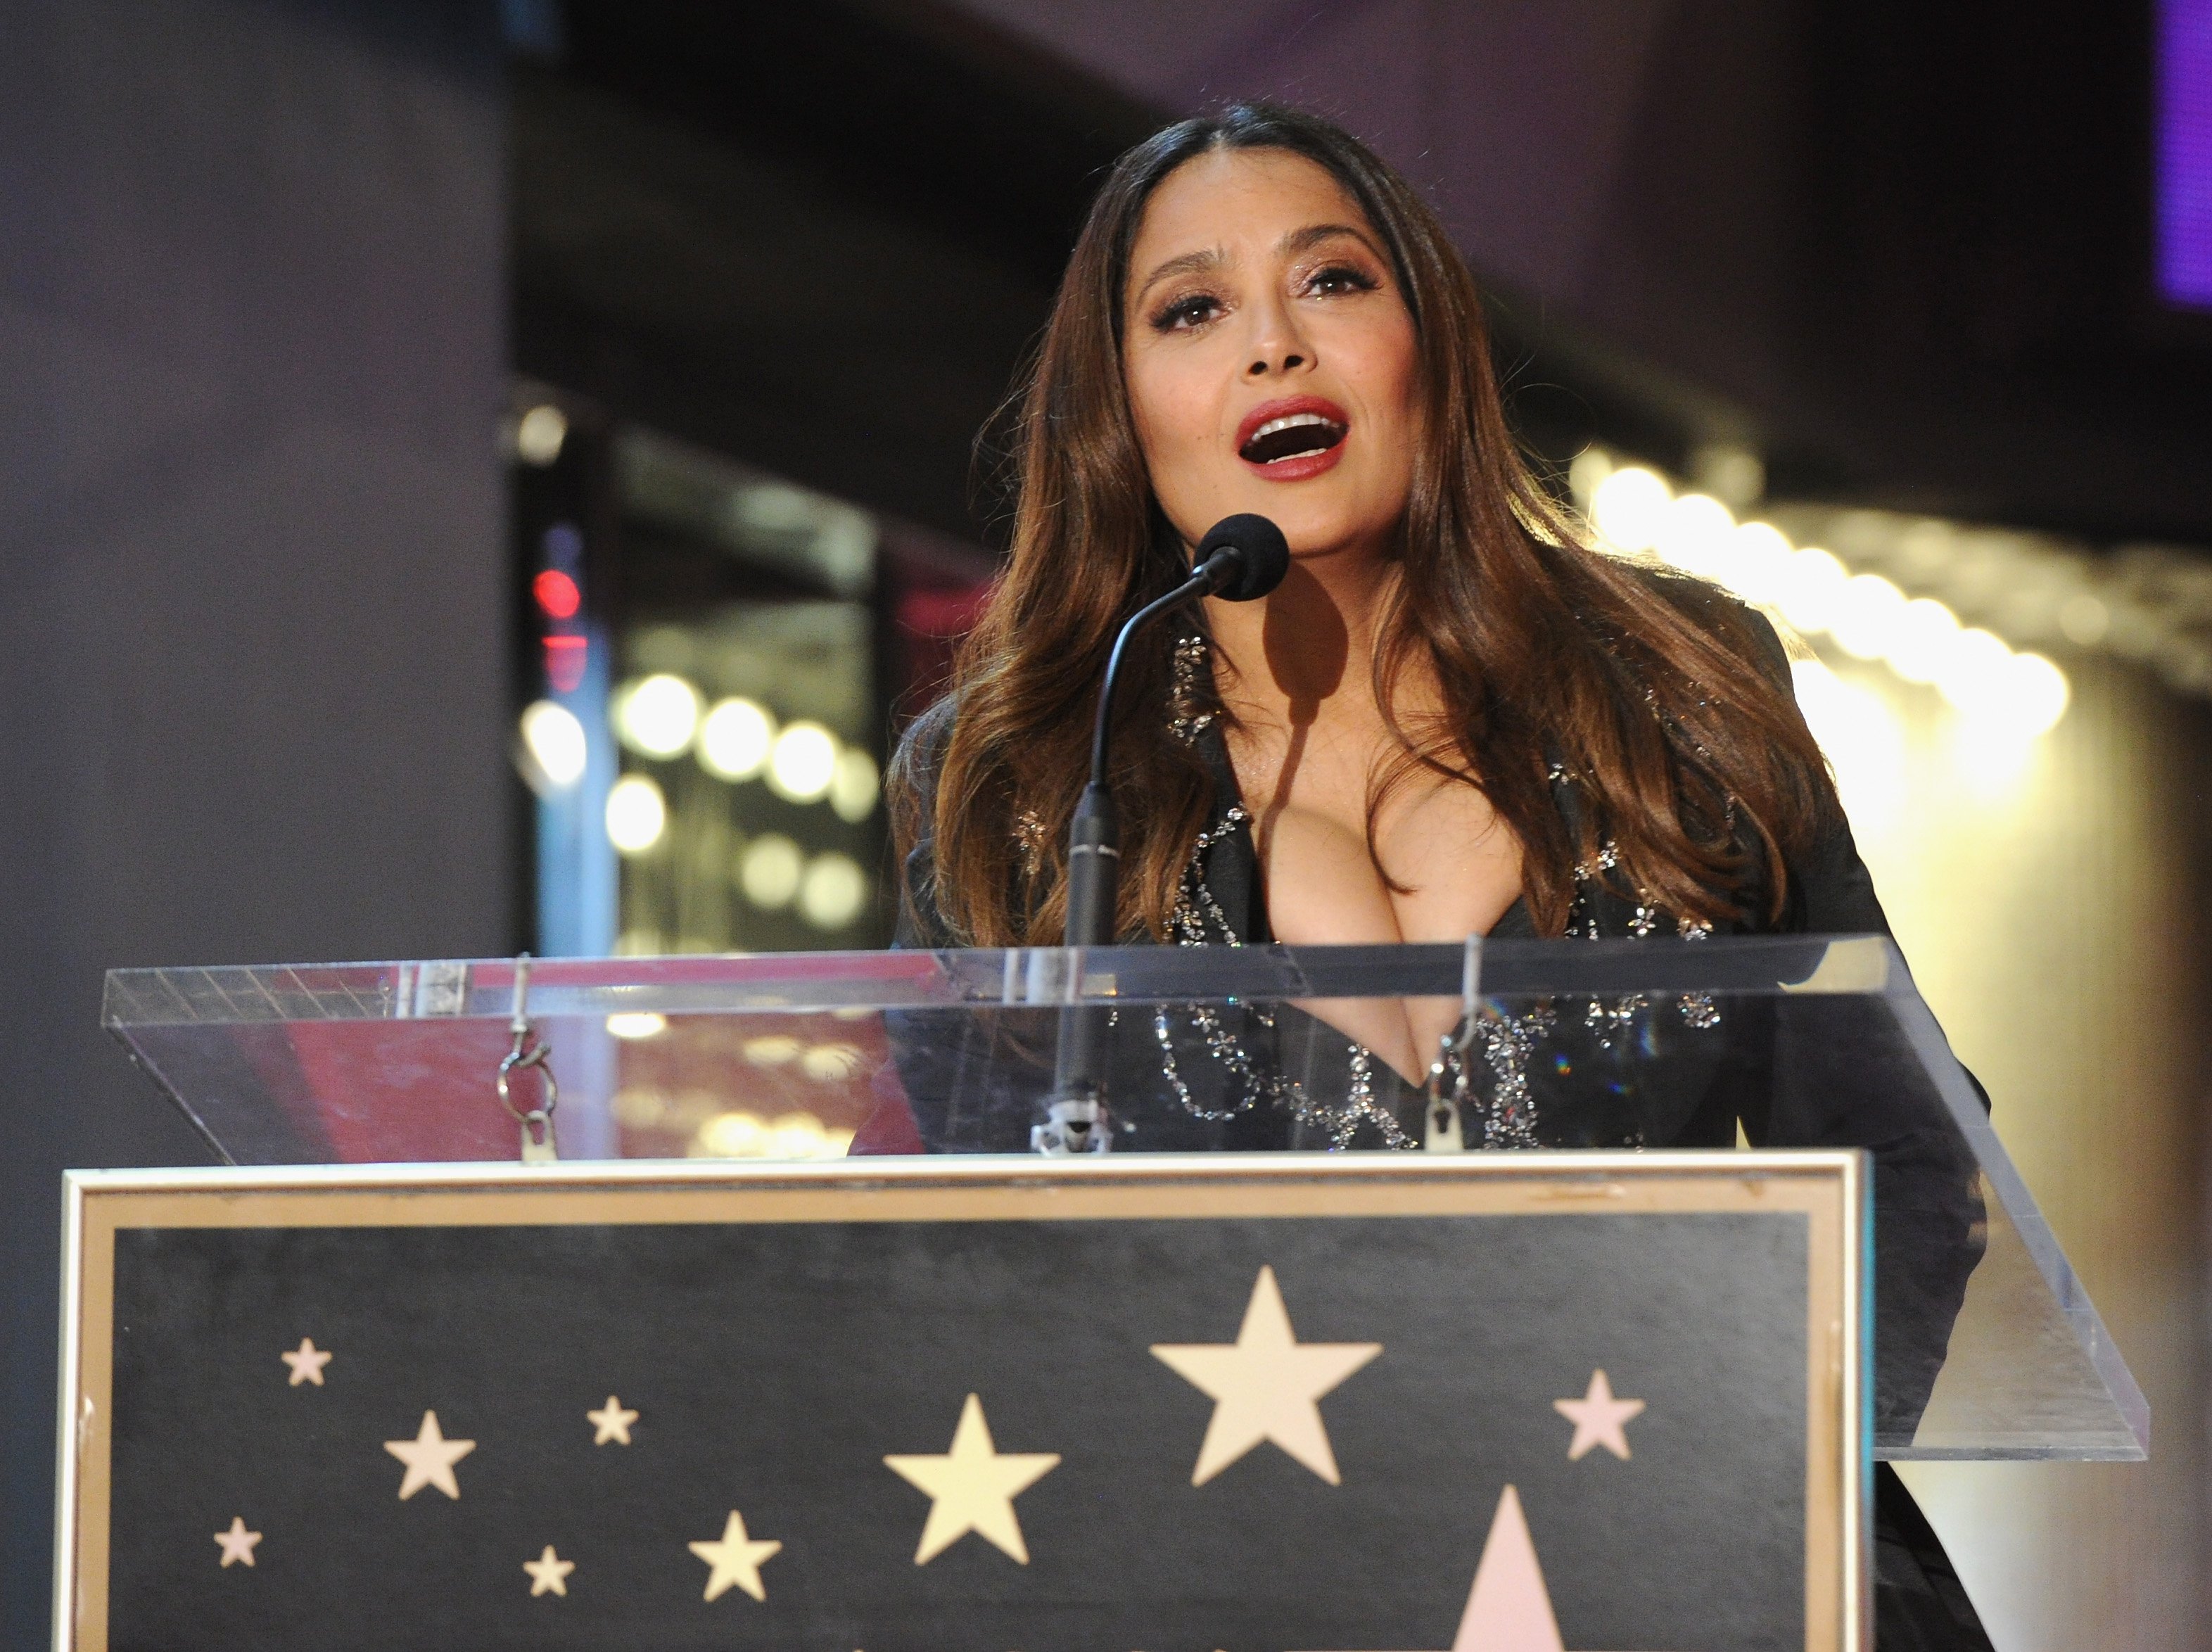  Salma Hayek Pinault is honored with a star on the Hollywood Walk Of Fame held at Hollywood Walk Of Fame on November 19, 2021. | Photo: Getty Images